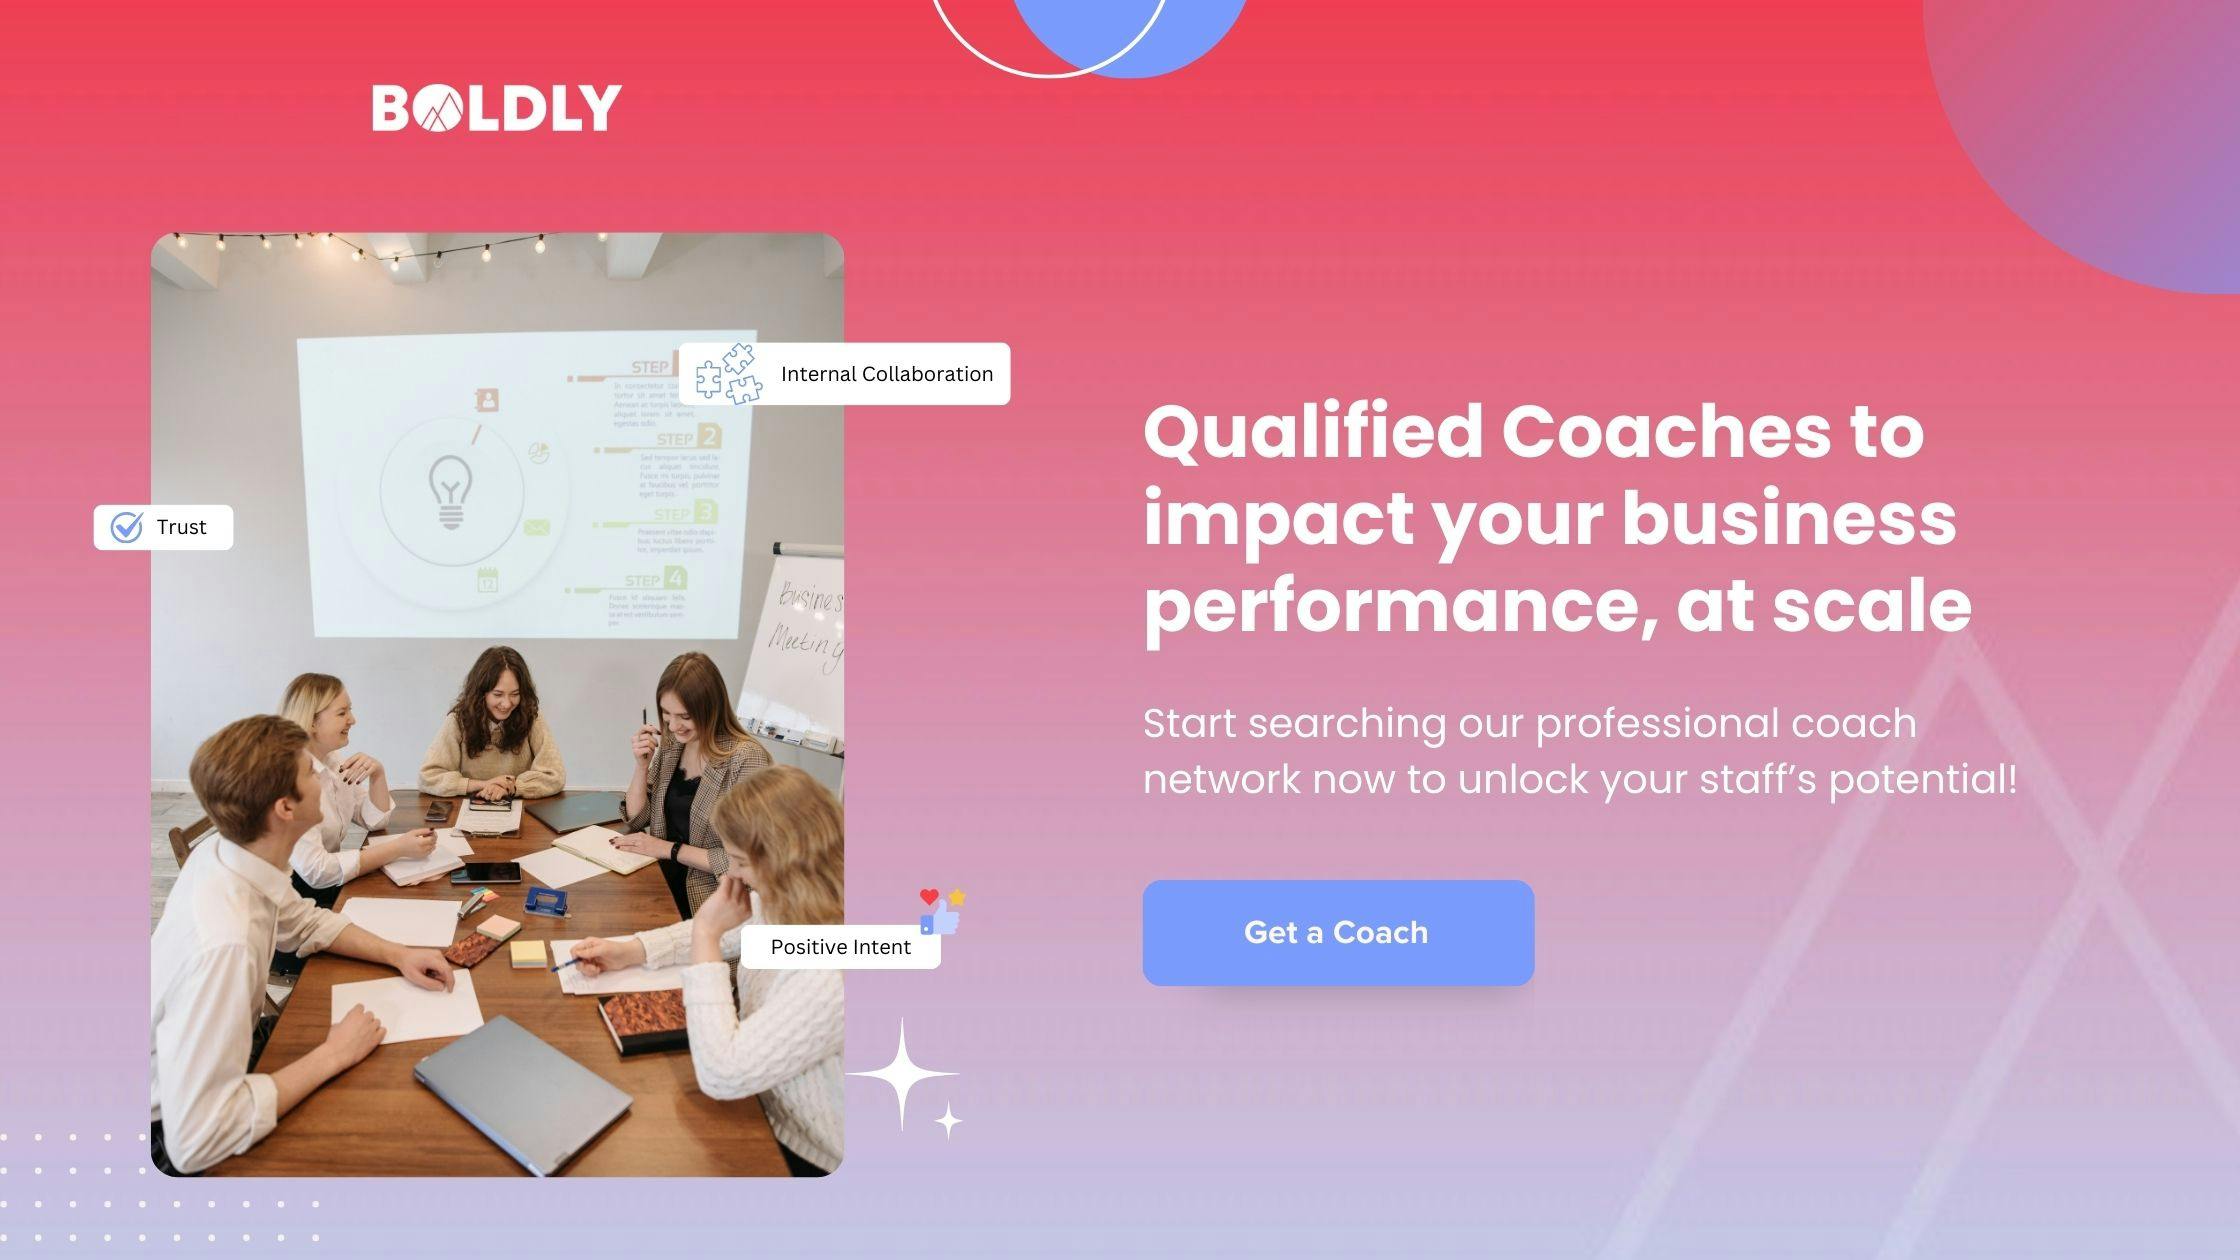 Find qualified Coaches to impact your business at BOLDLY